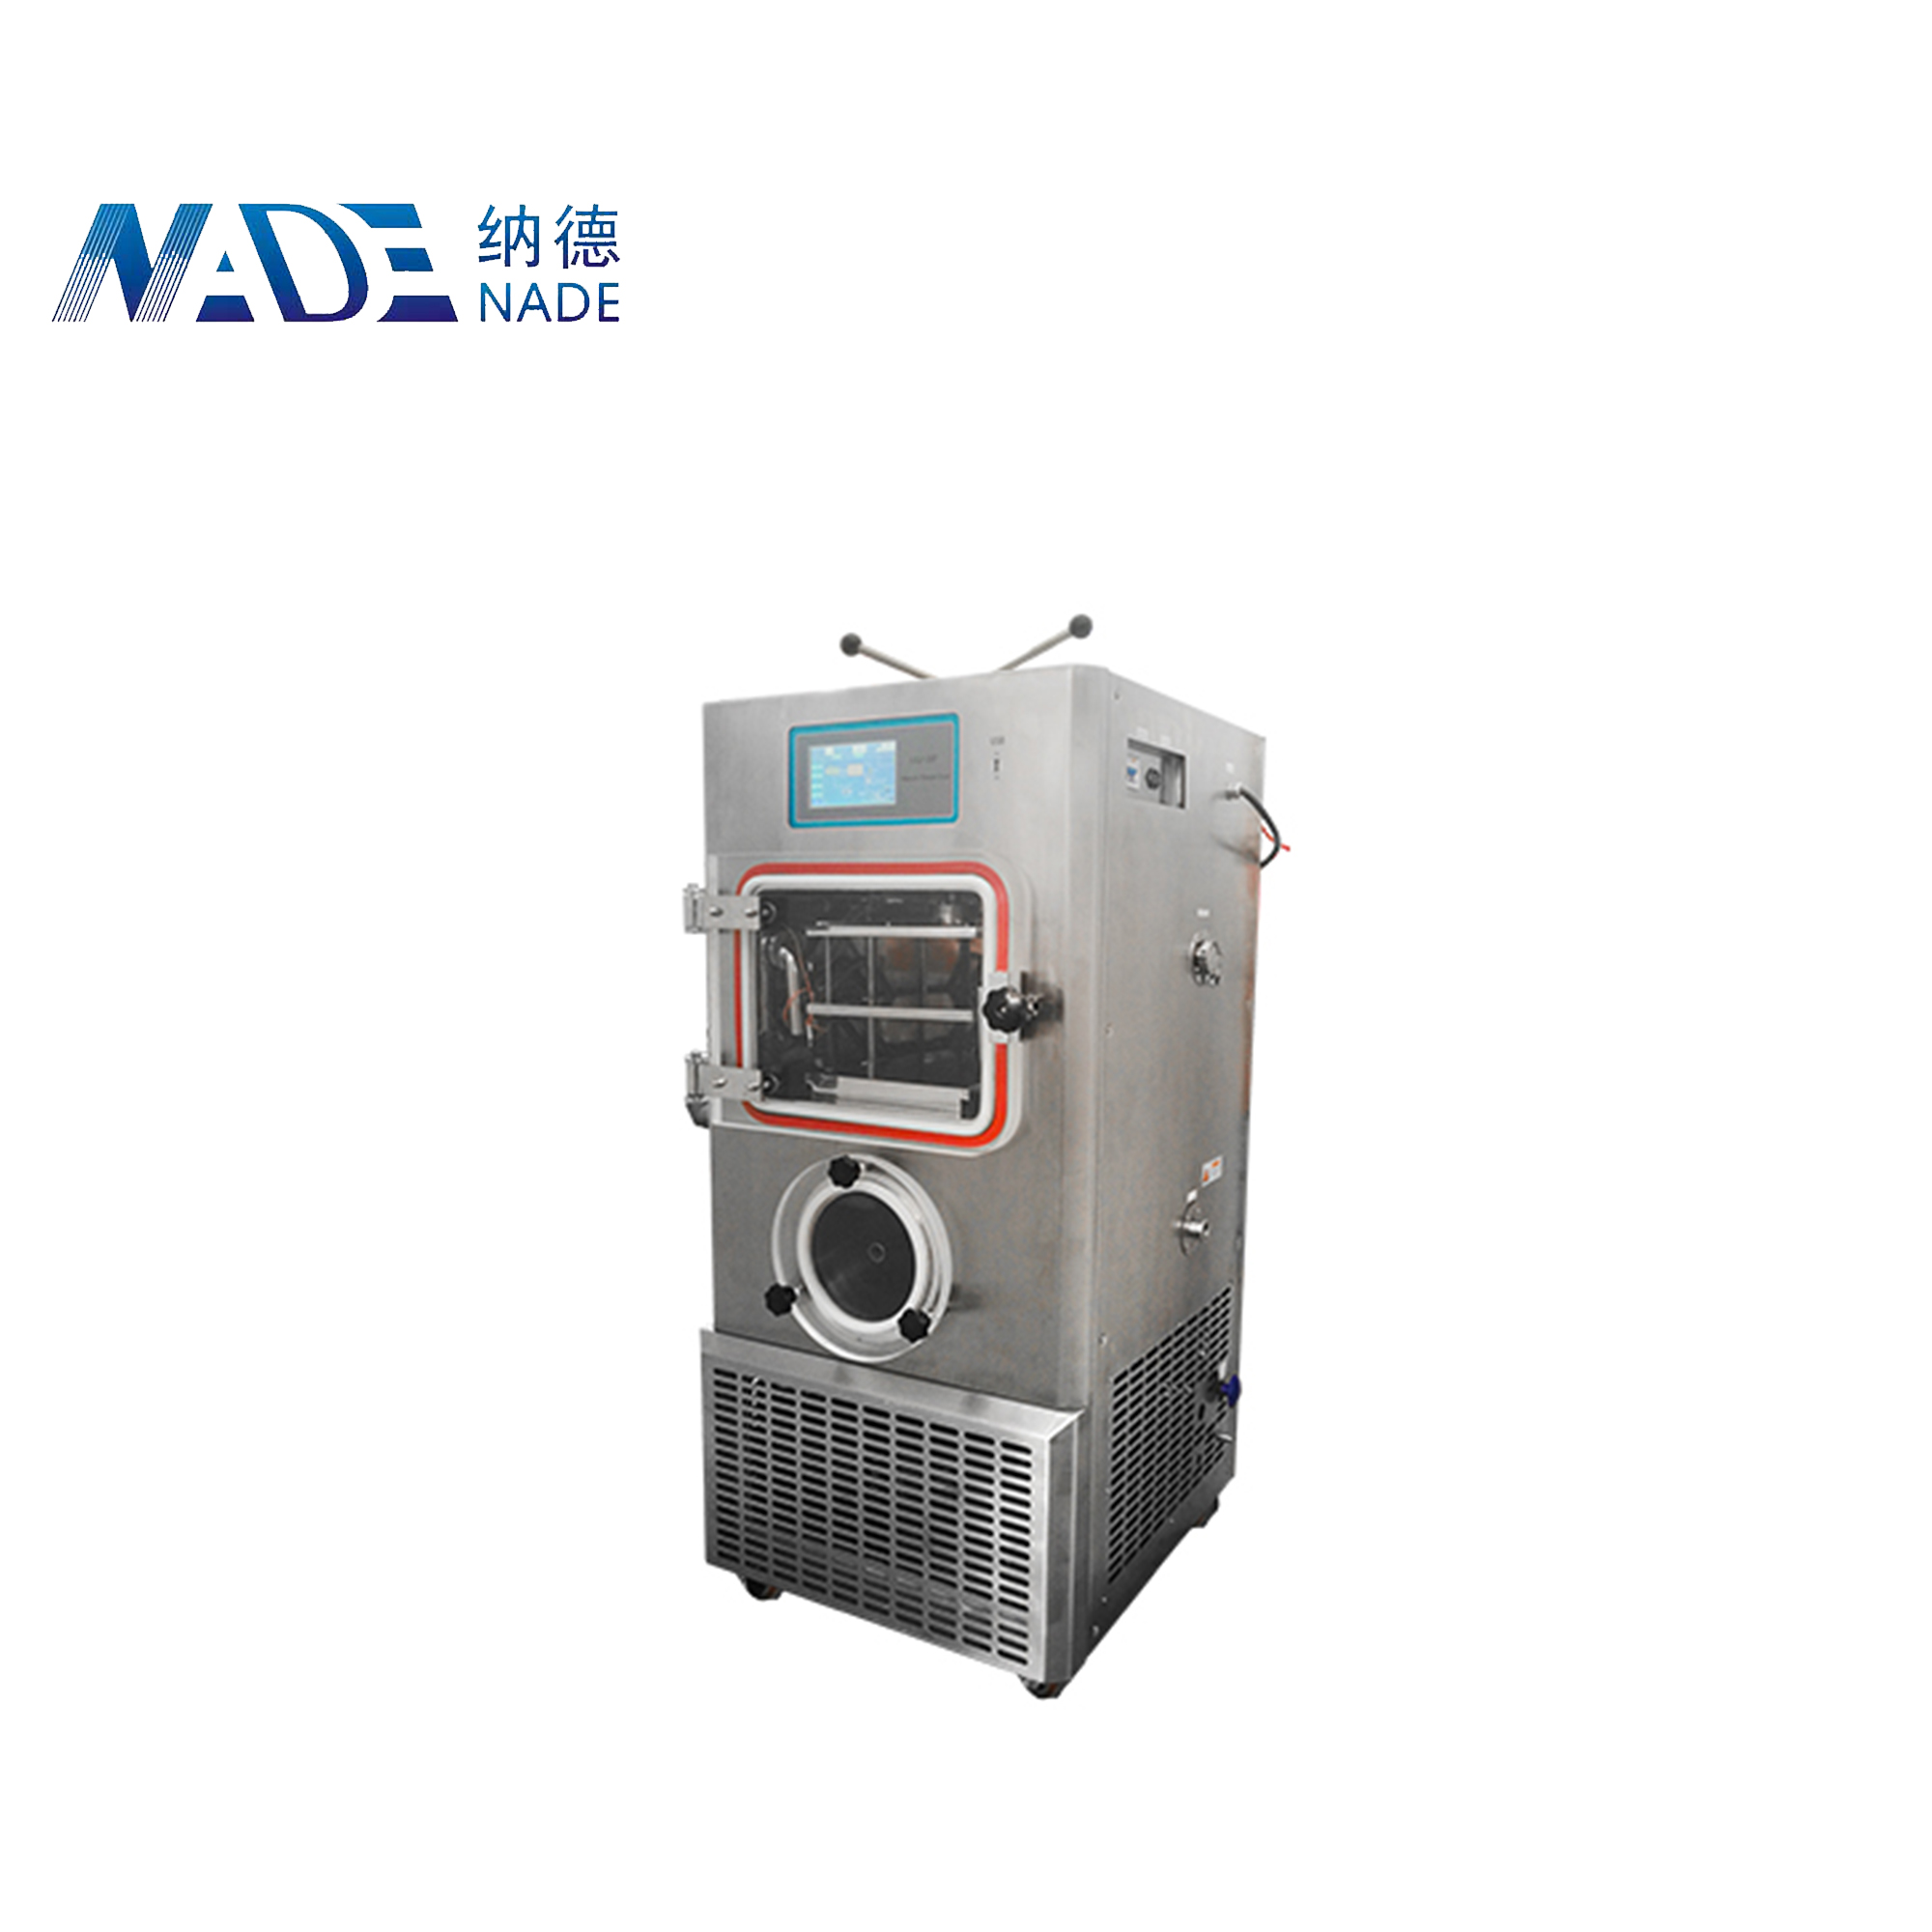 NADE LGJ-20FY Top Press Type Silicone Oil Heating Vacuum Lyophilizer/freeze drying equipment/freeze dryer for vial